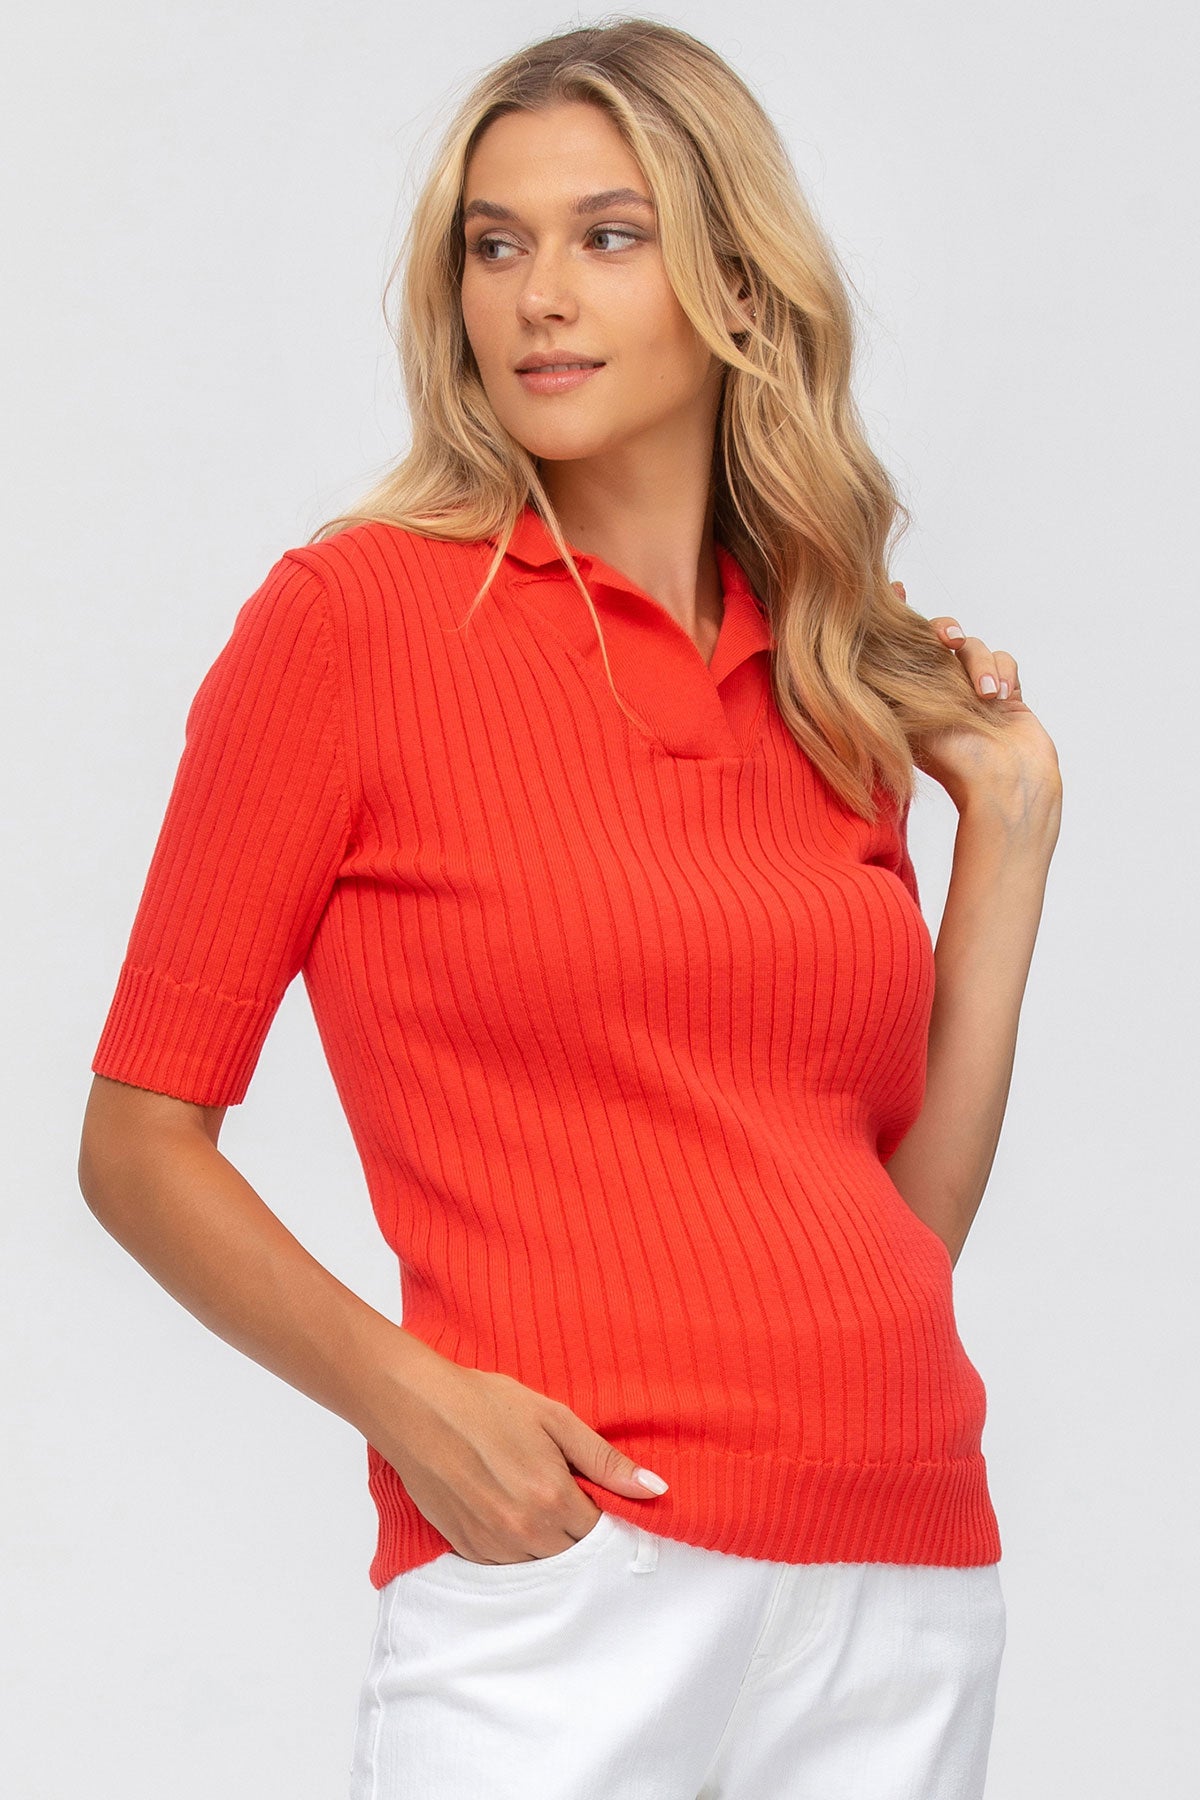 CHRISTINE | Red Ribbed Maternity Top with Collar